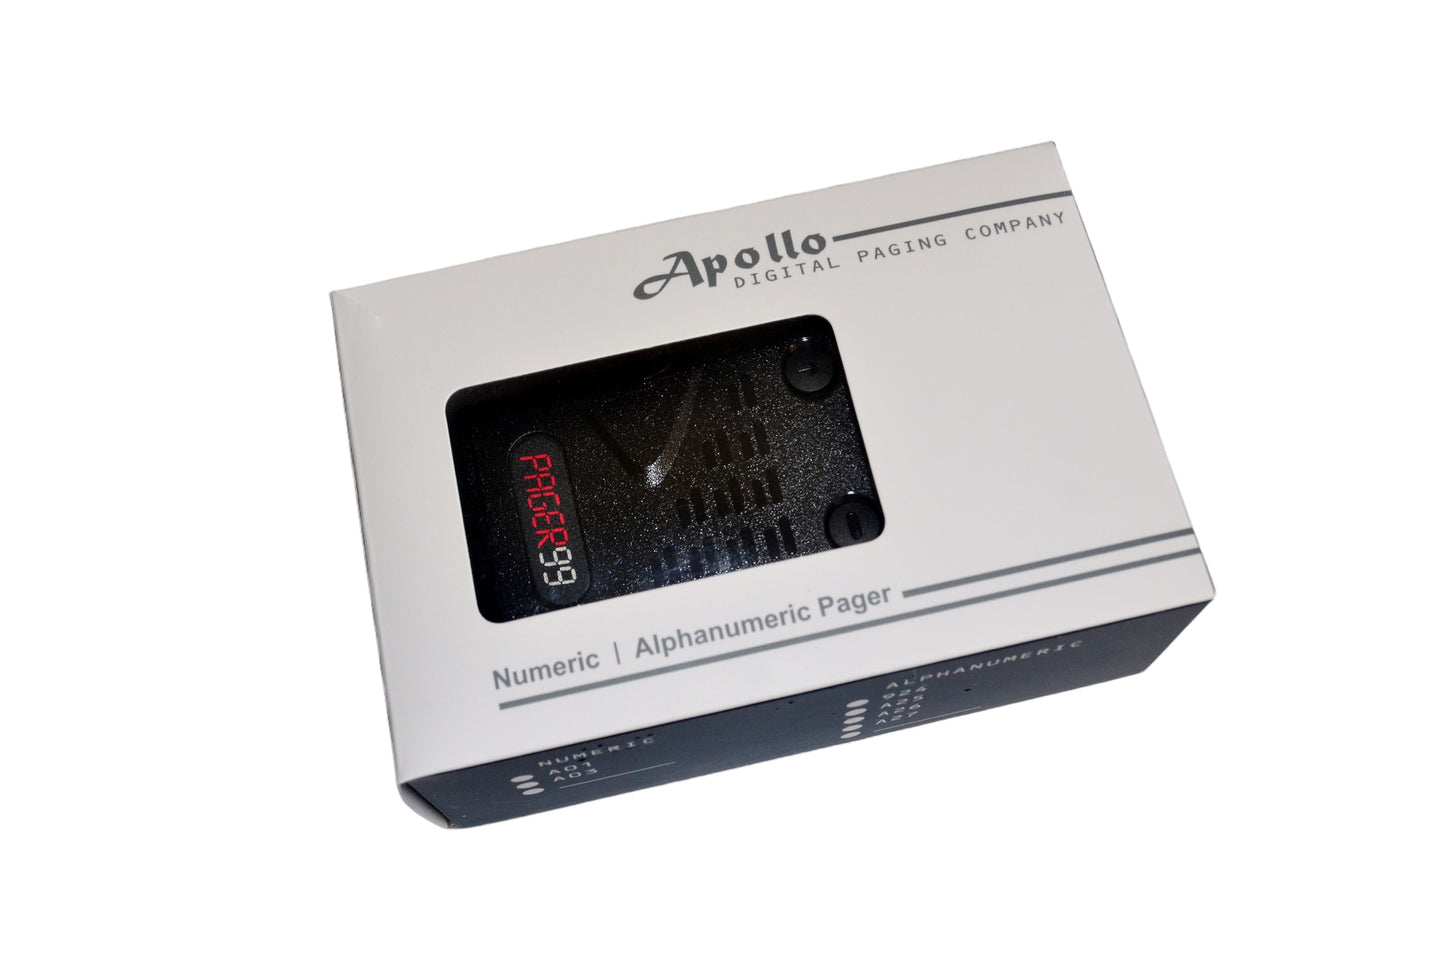 Apollo XL2000 1-Way Numeric Pager (Brand New) with Monthly Prepaid Service